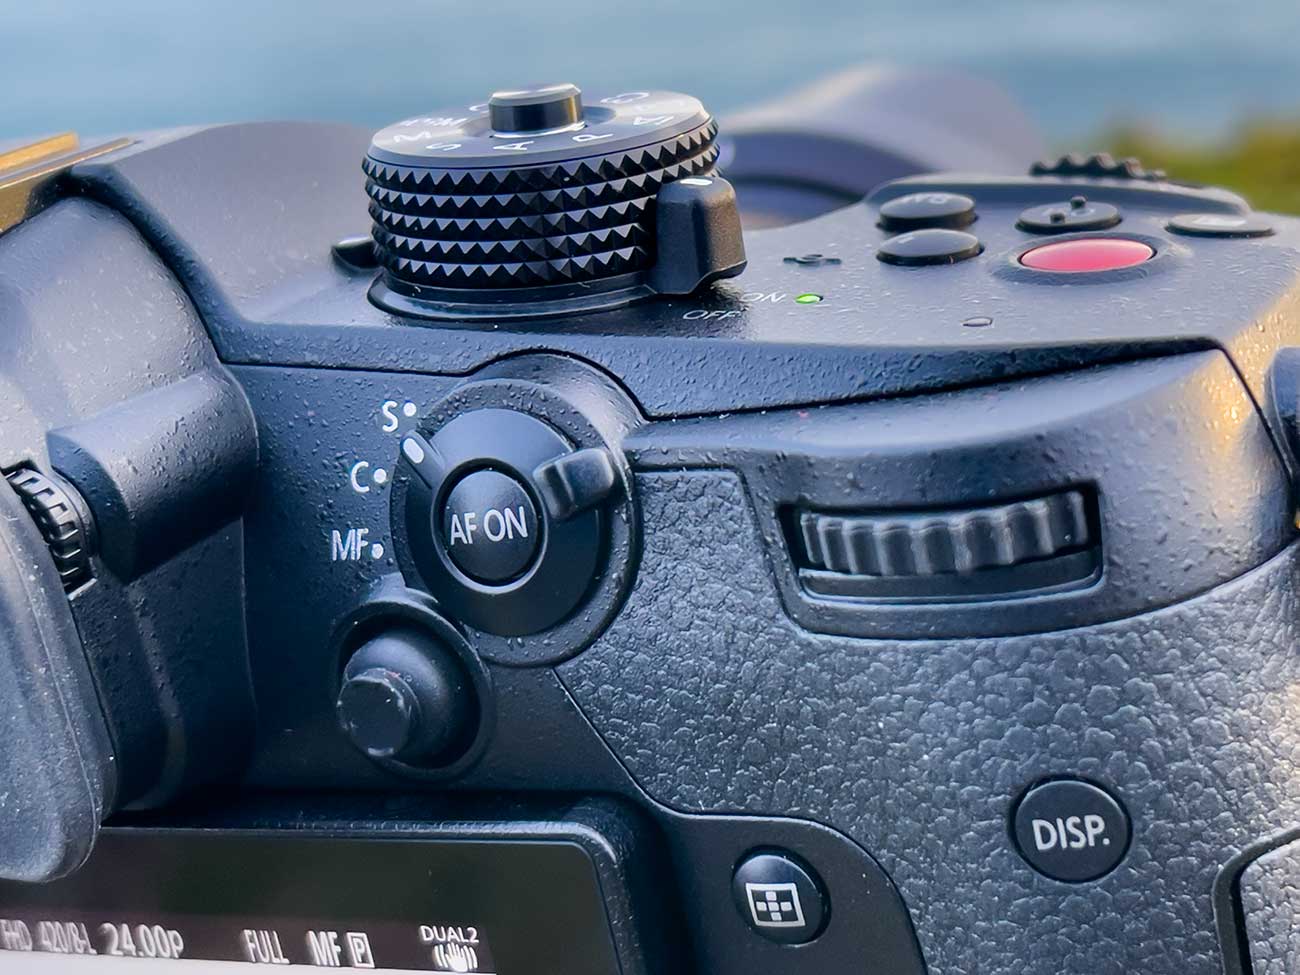 The controls on the GH5 II are solid and easy to read.